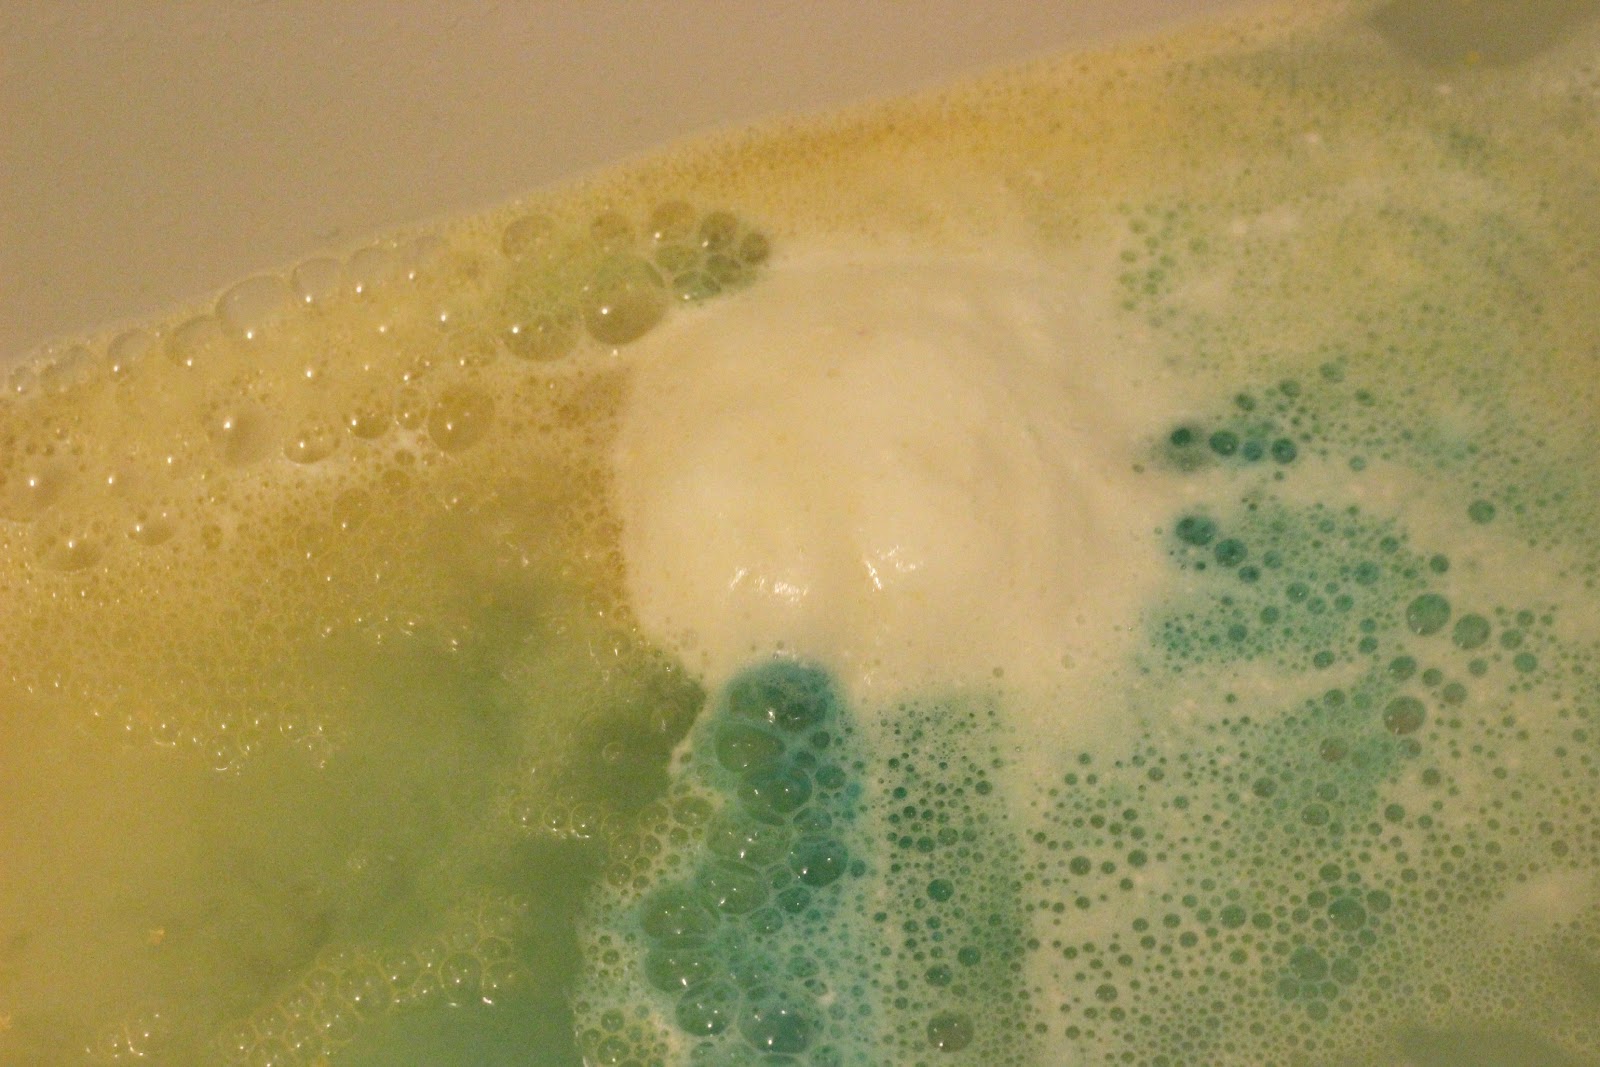 The first stage of the Lush Golden Wonder Bath ballistic